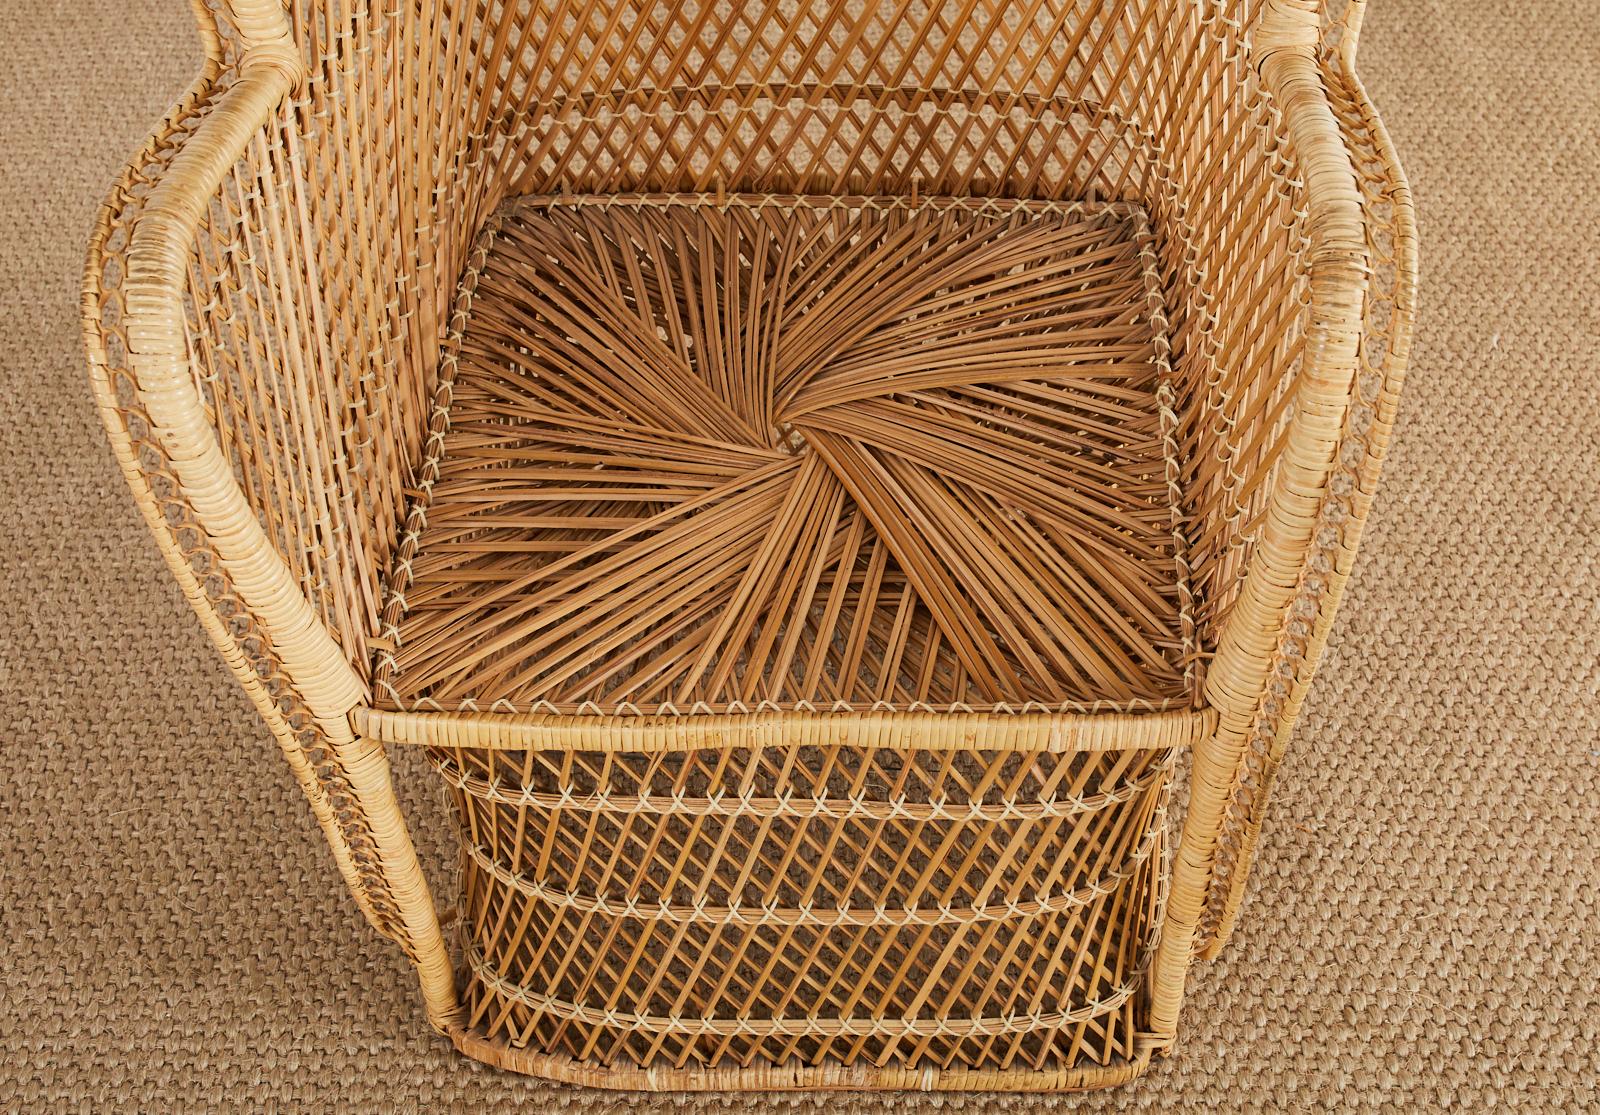 Hand-Crafted Tall Rattan Wicker Porters Style Peacock Chair